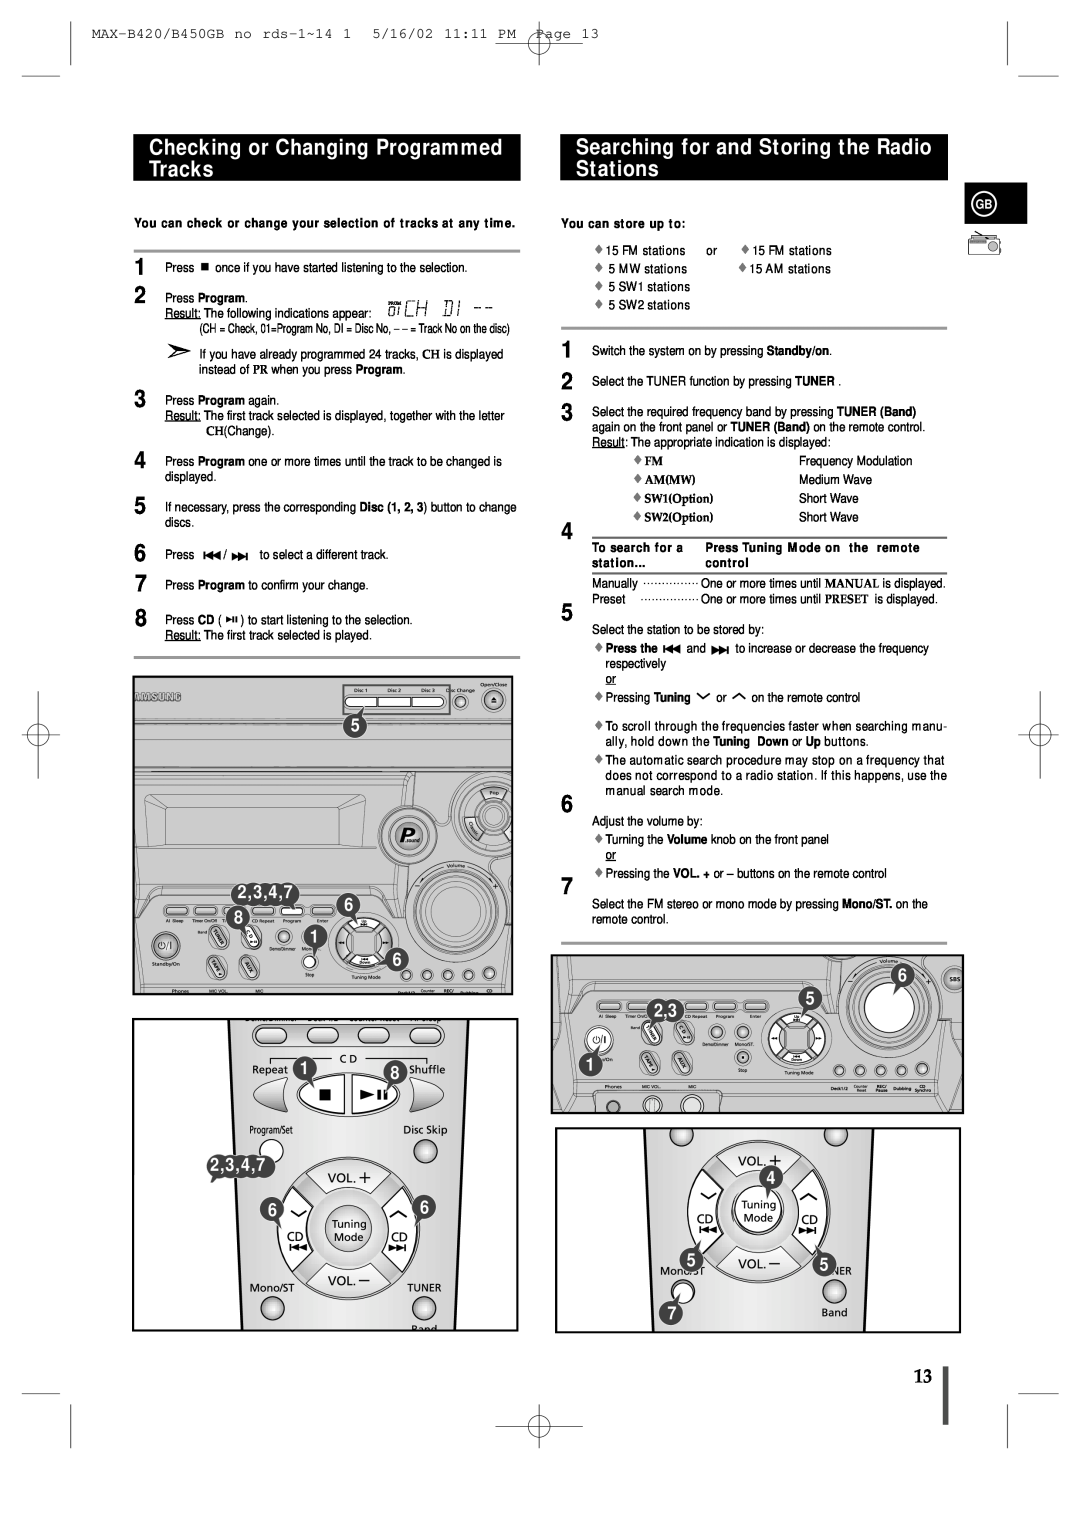 Samsung MAX-B450 instruction manual Checking or Changing Programmed Tracks, Searching for and Storing the Radio Stations 